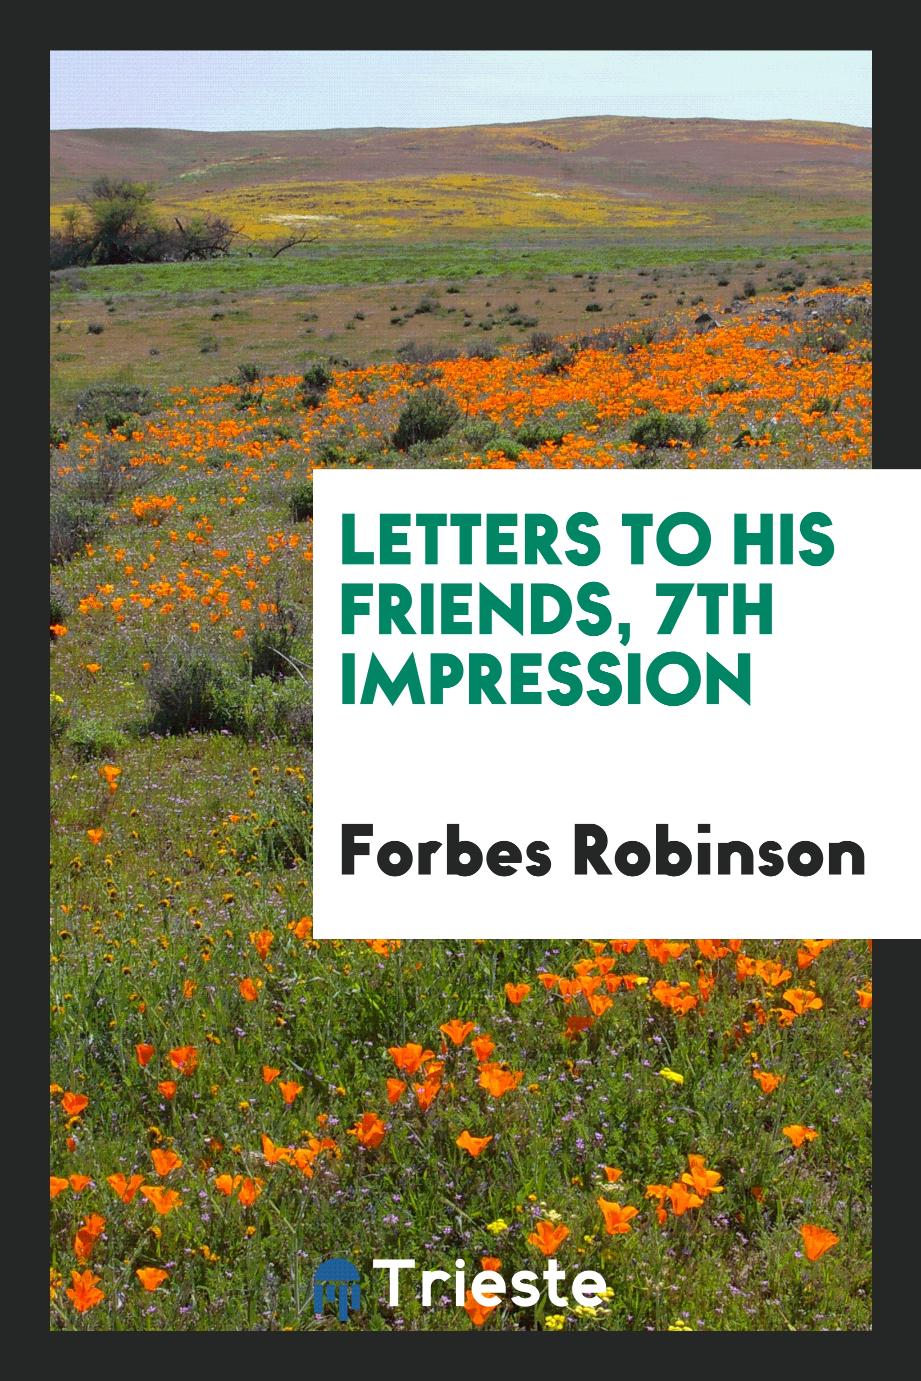 Letters to his friends, 7th impression